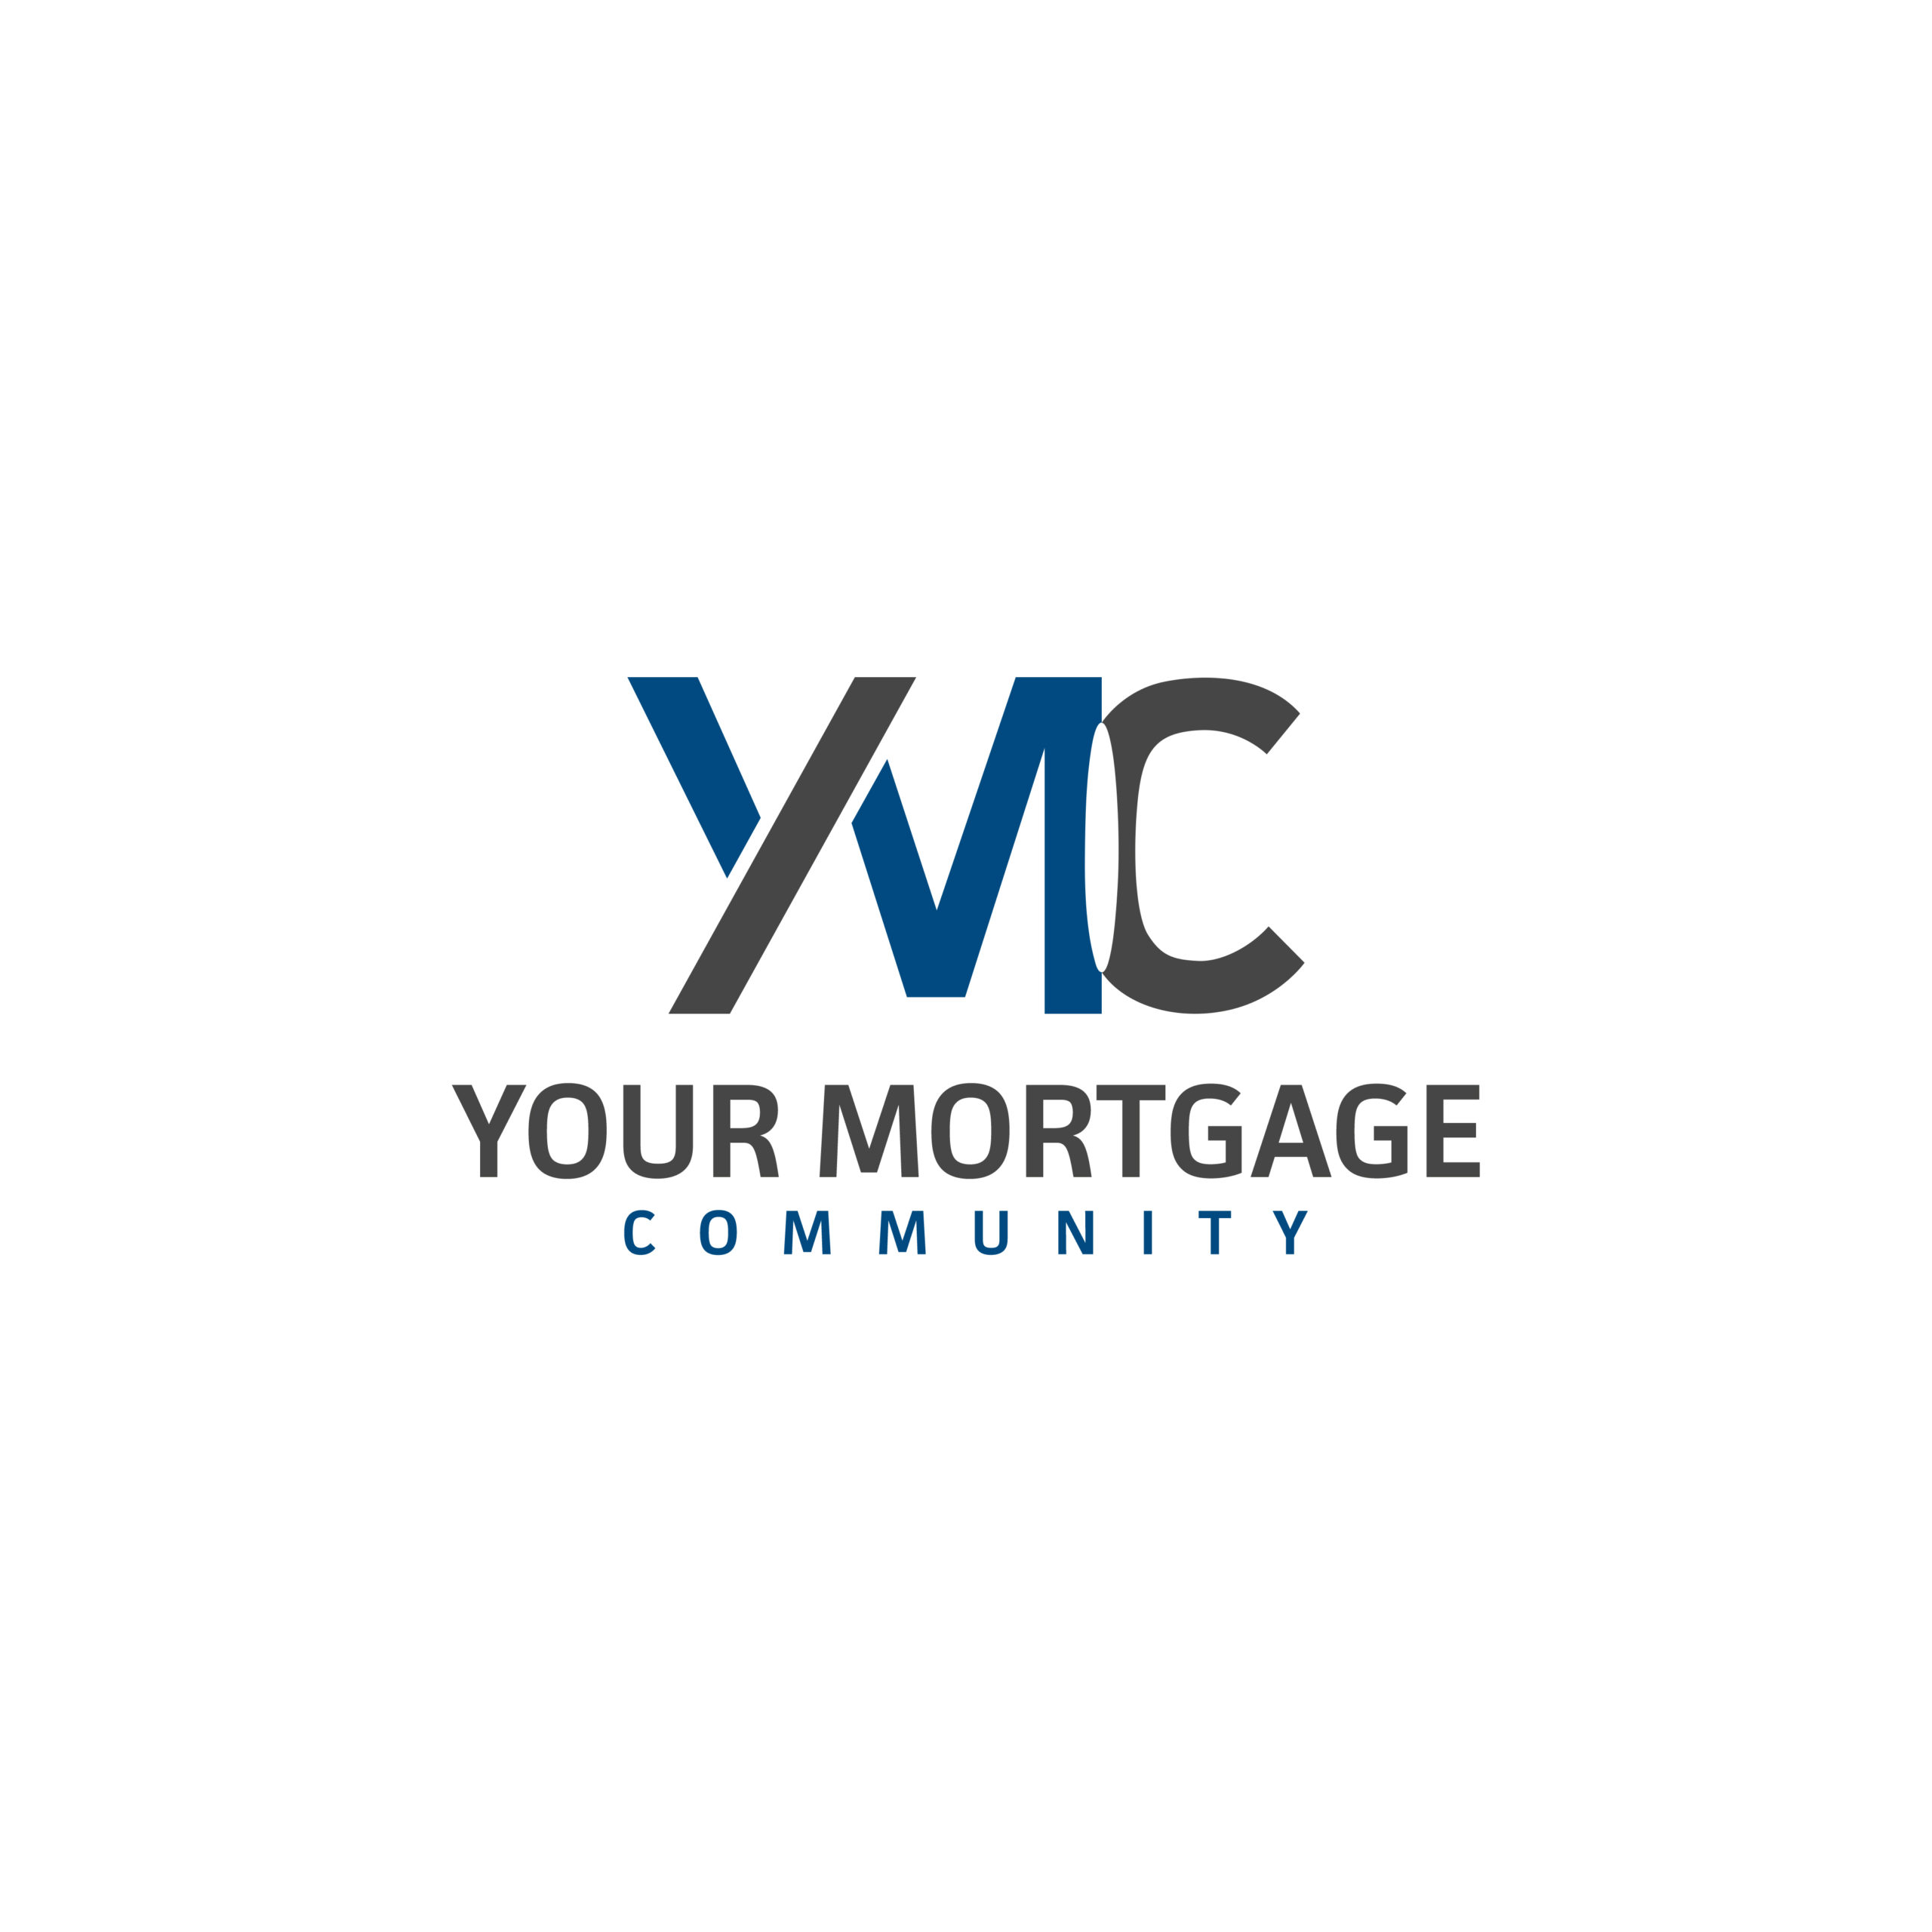  Your Mortgage Community